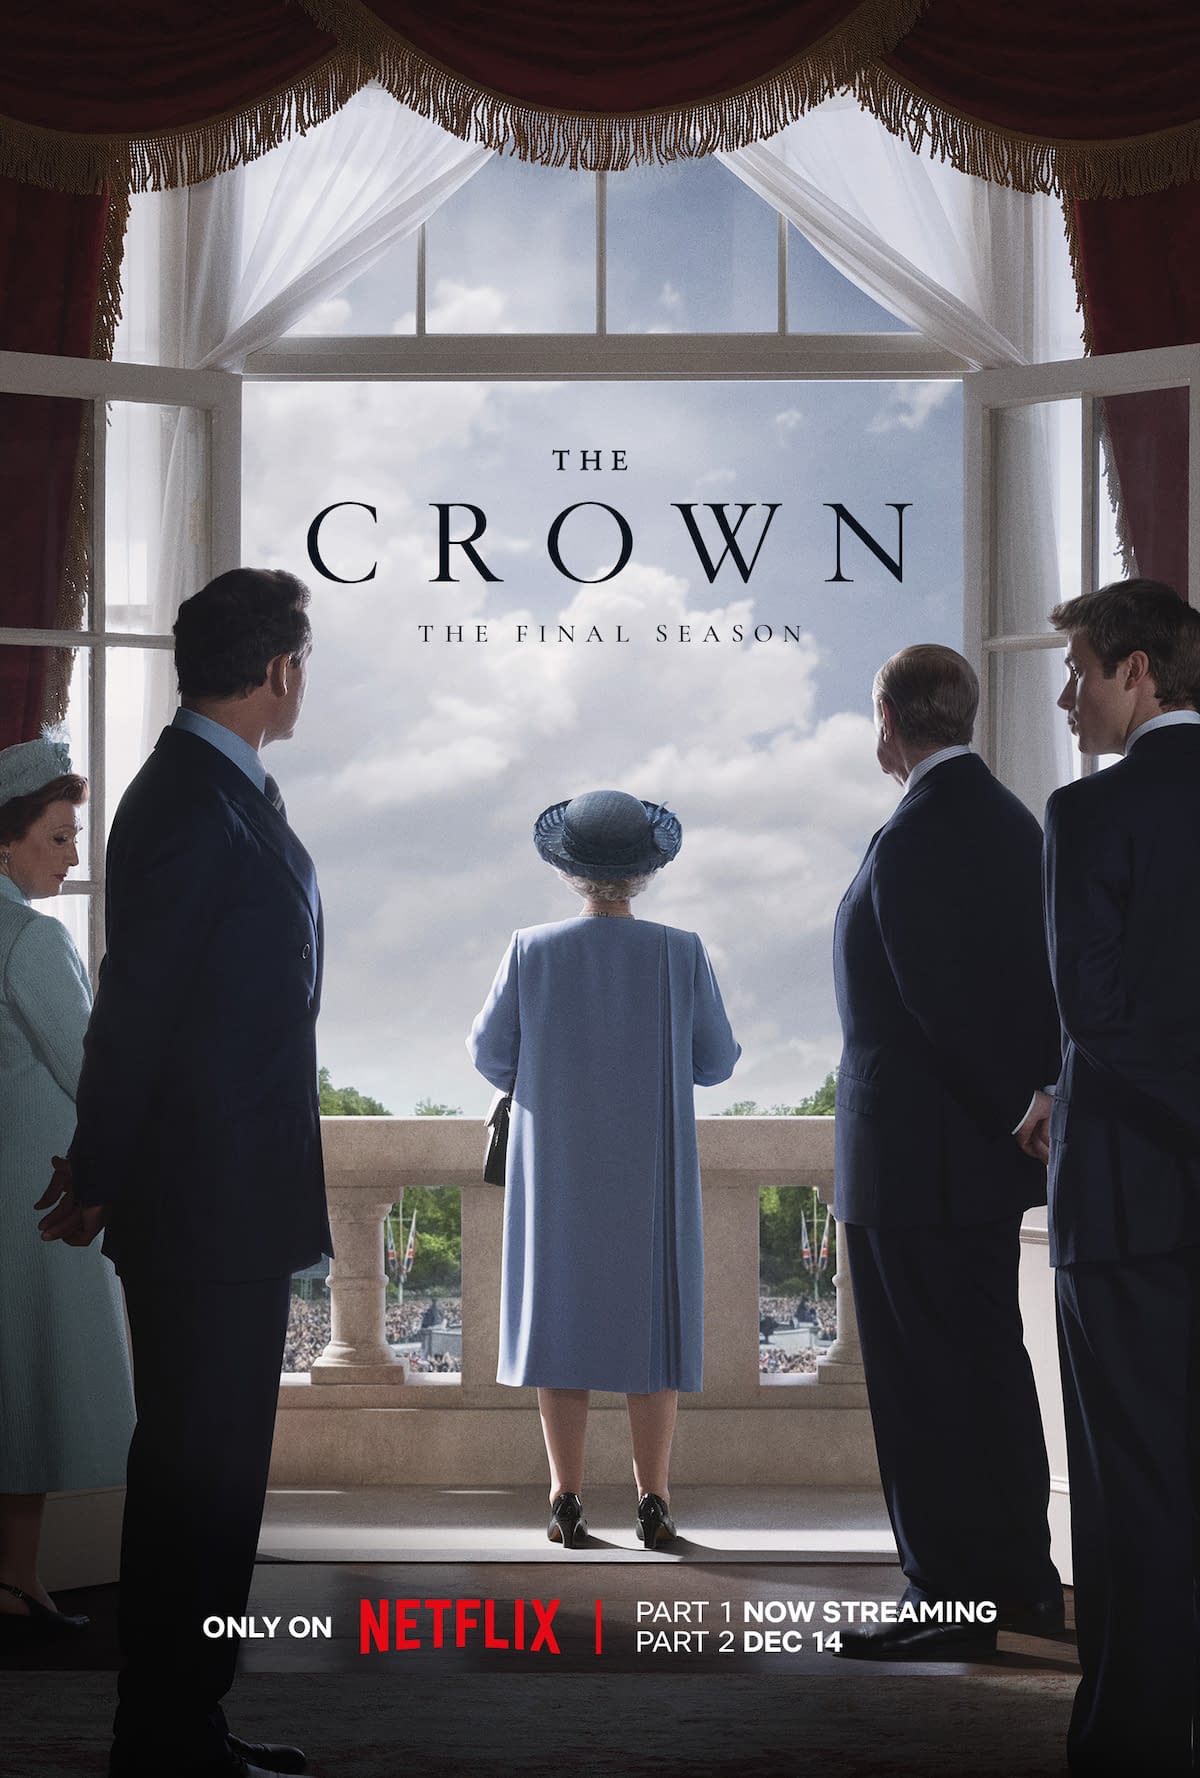 The Crown Season 6 Part 2 Official Trailer, Key Art Poster Released